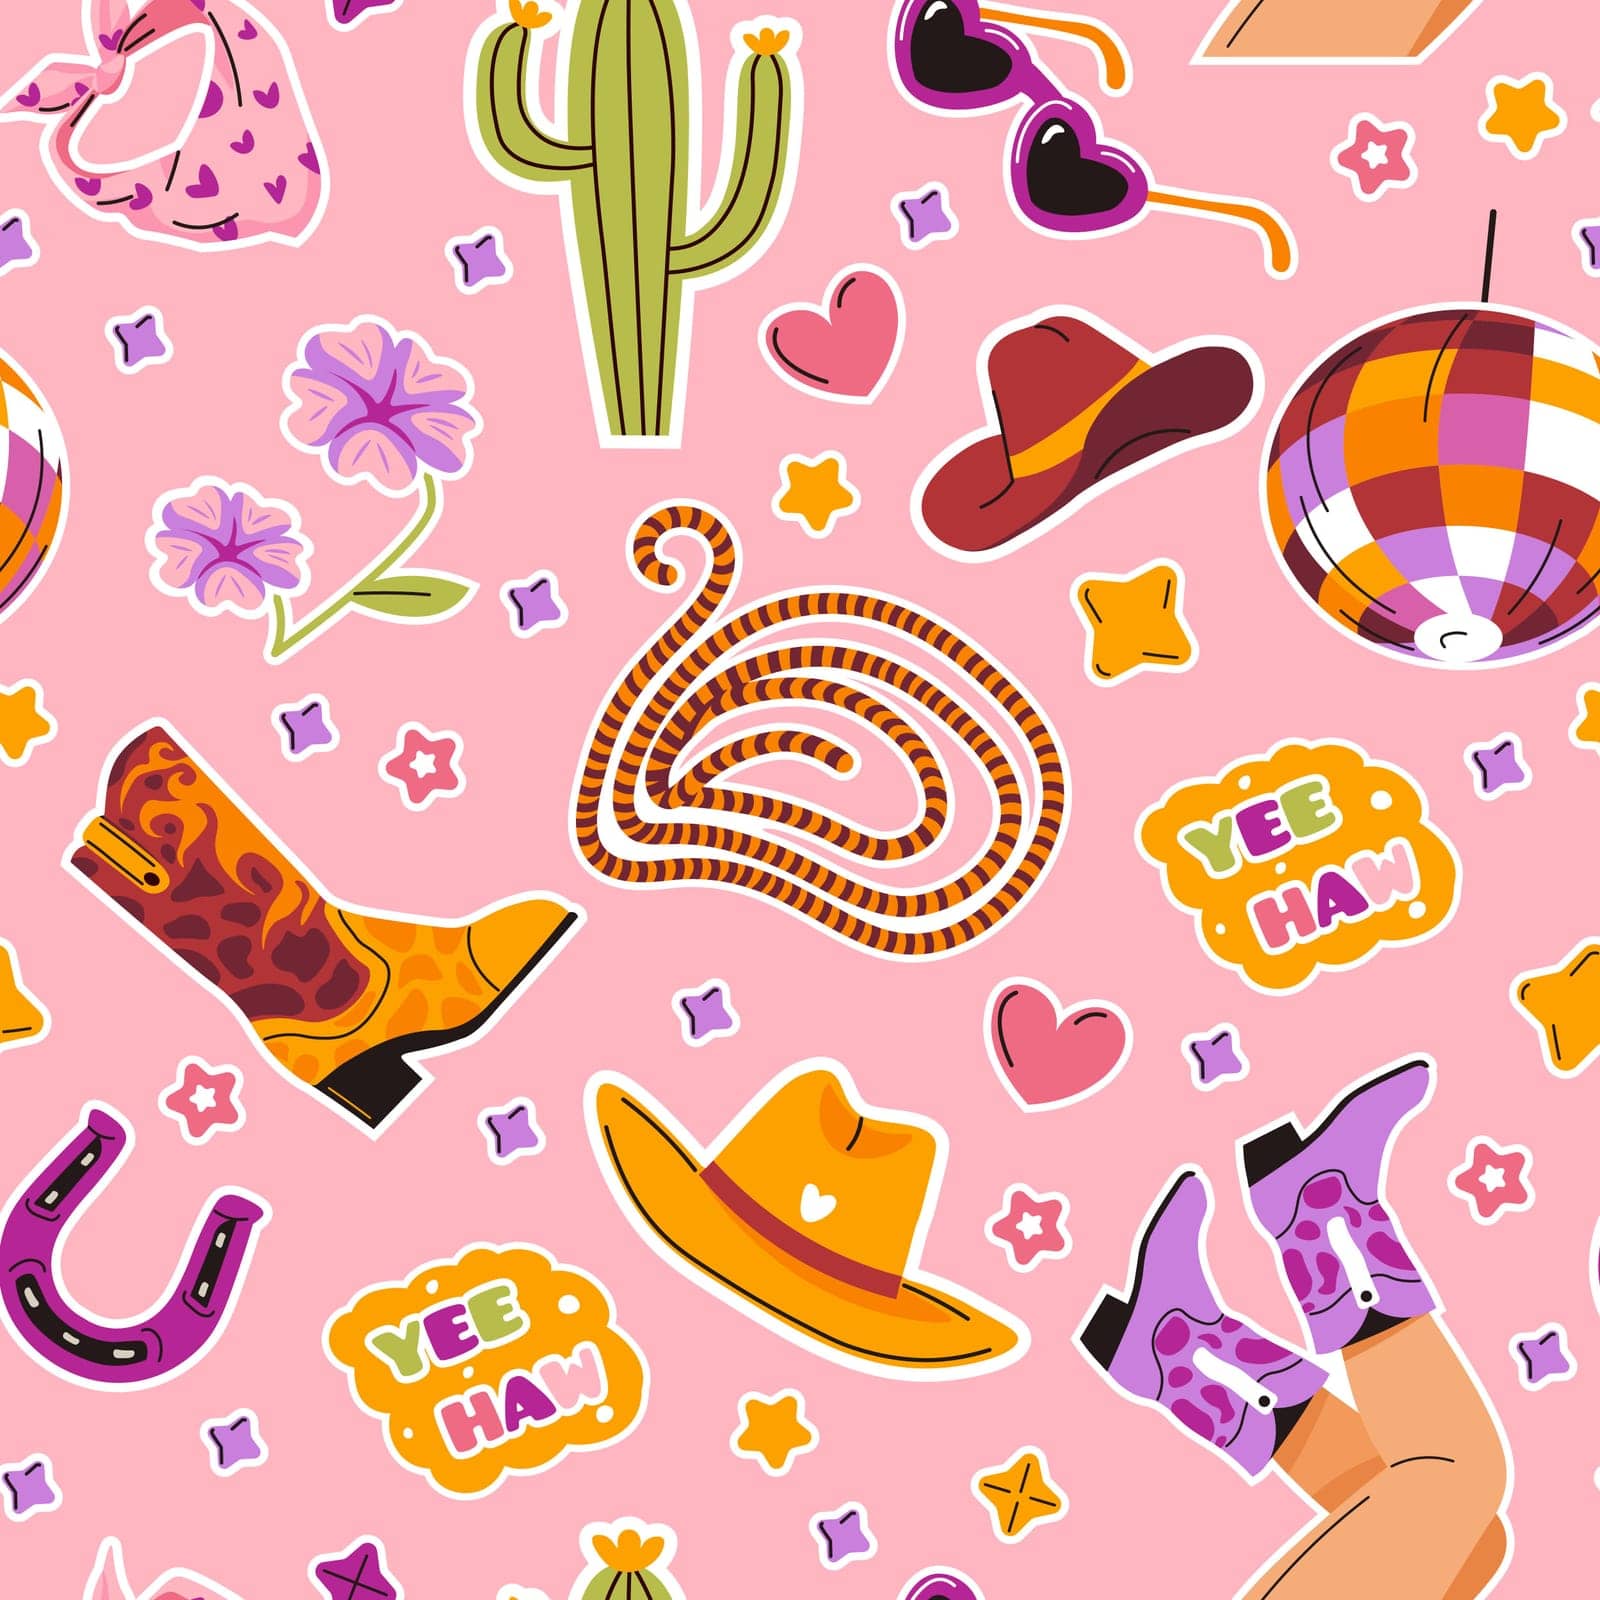 A playful western-themed seamless pattern with cowboy elements on a pink background, vector illustration in a vibrant style